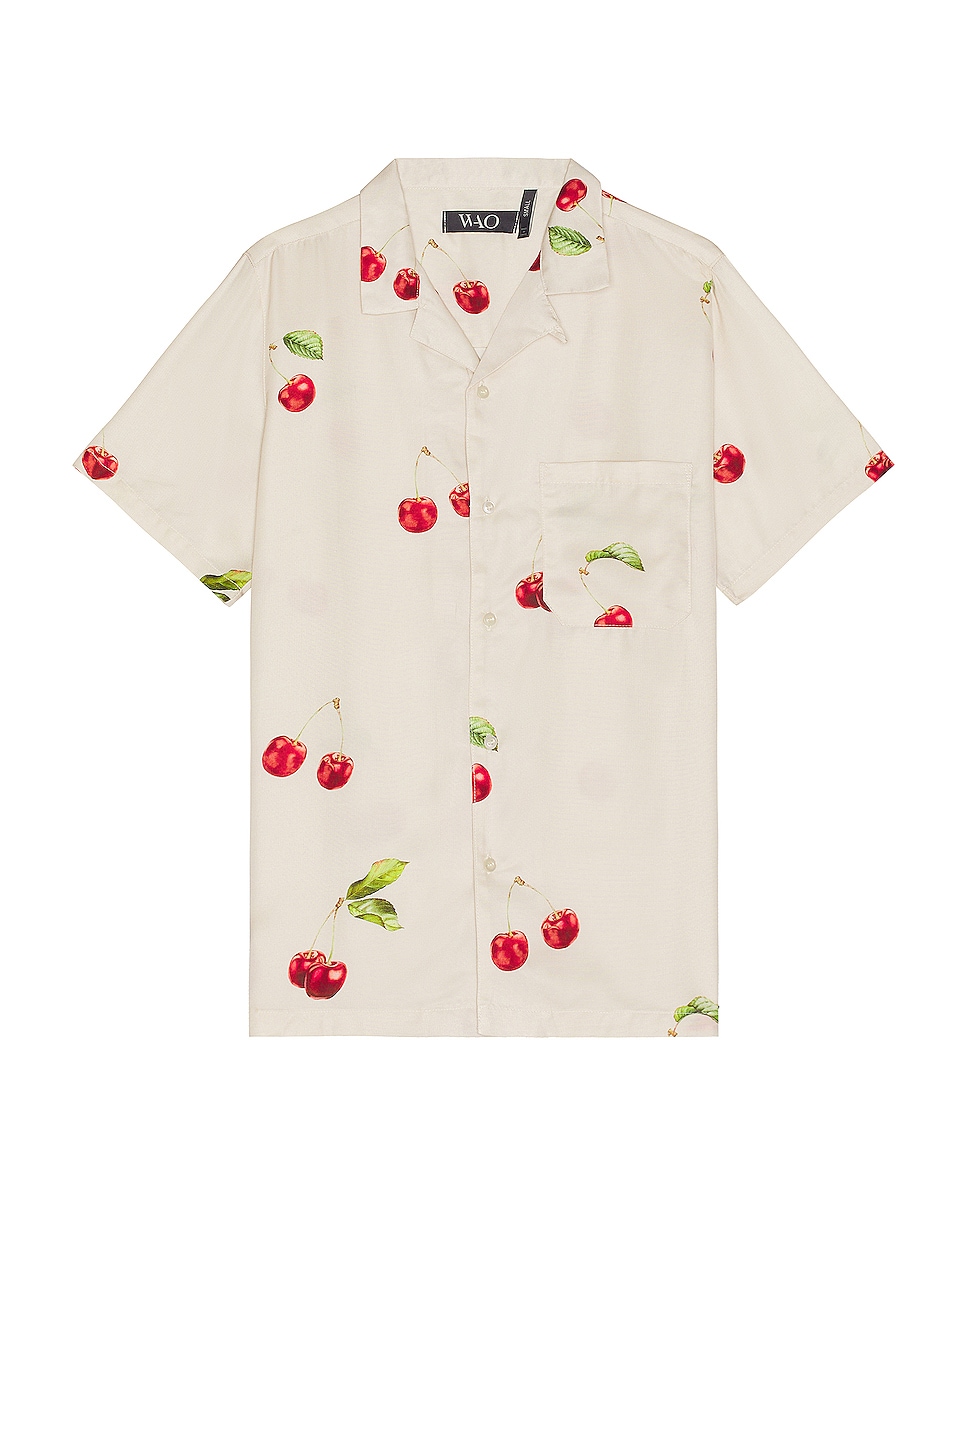 Image 1 of WAO The Camp Shirt in off white & red